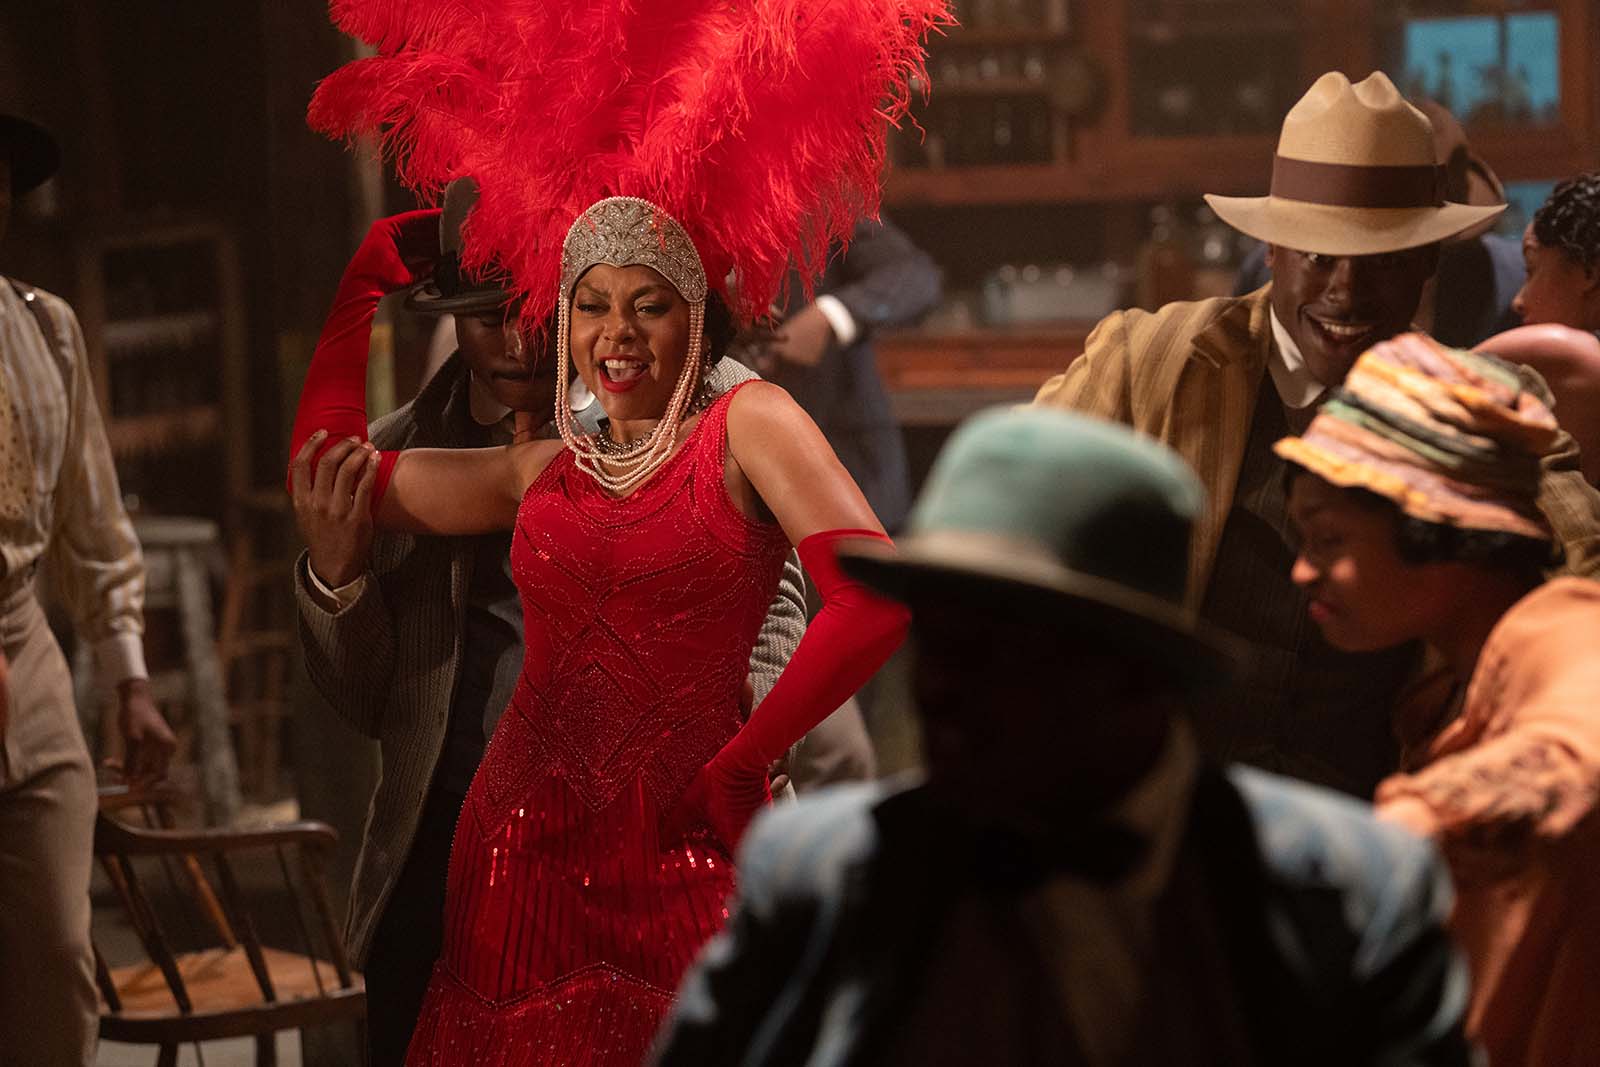 Shug brings down the house with her raucous blues act. Image © Warner Bros. Pictures